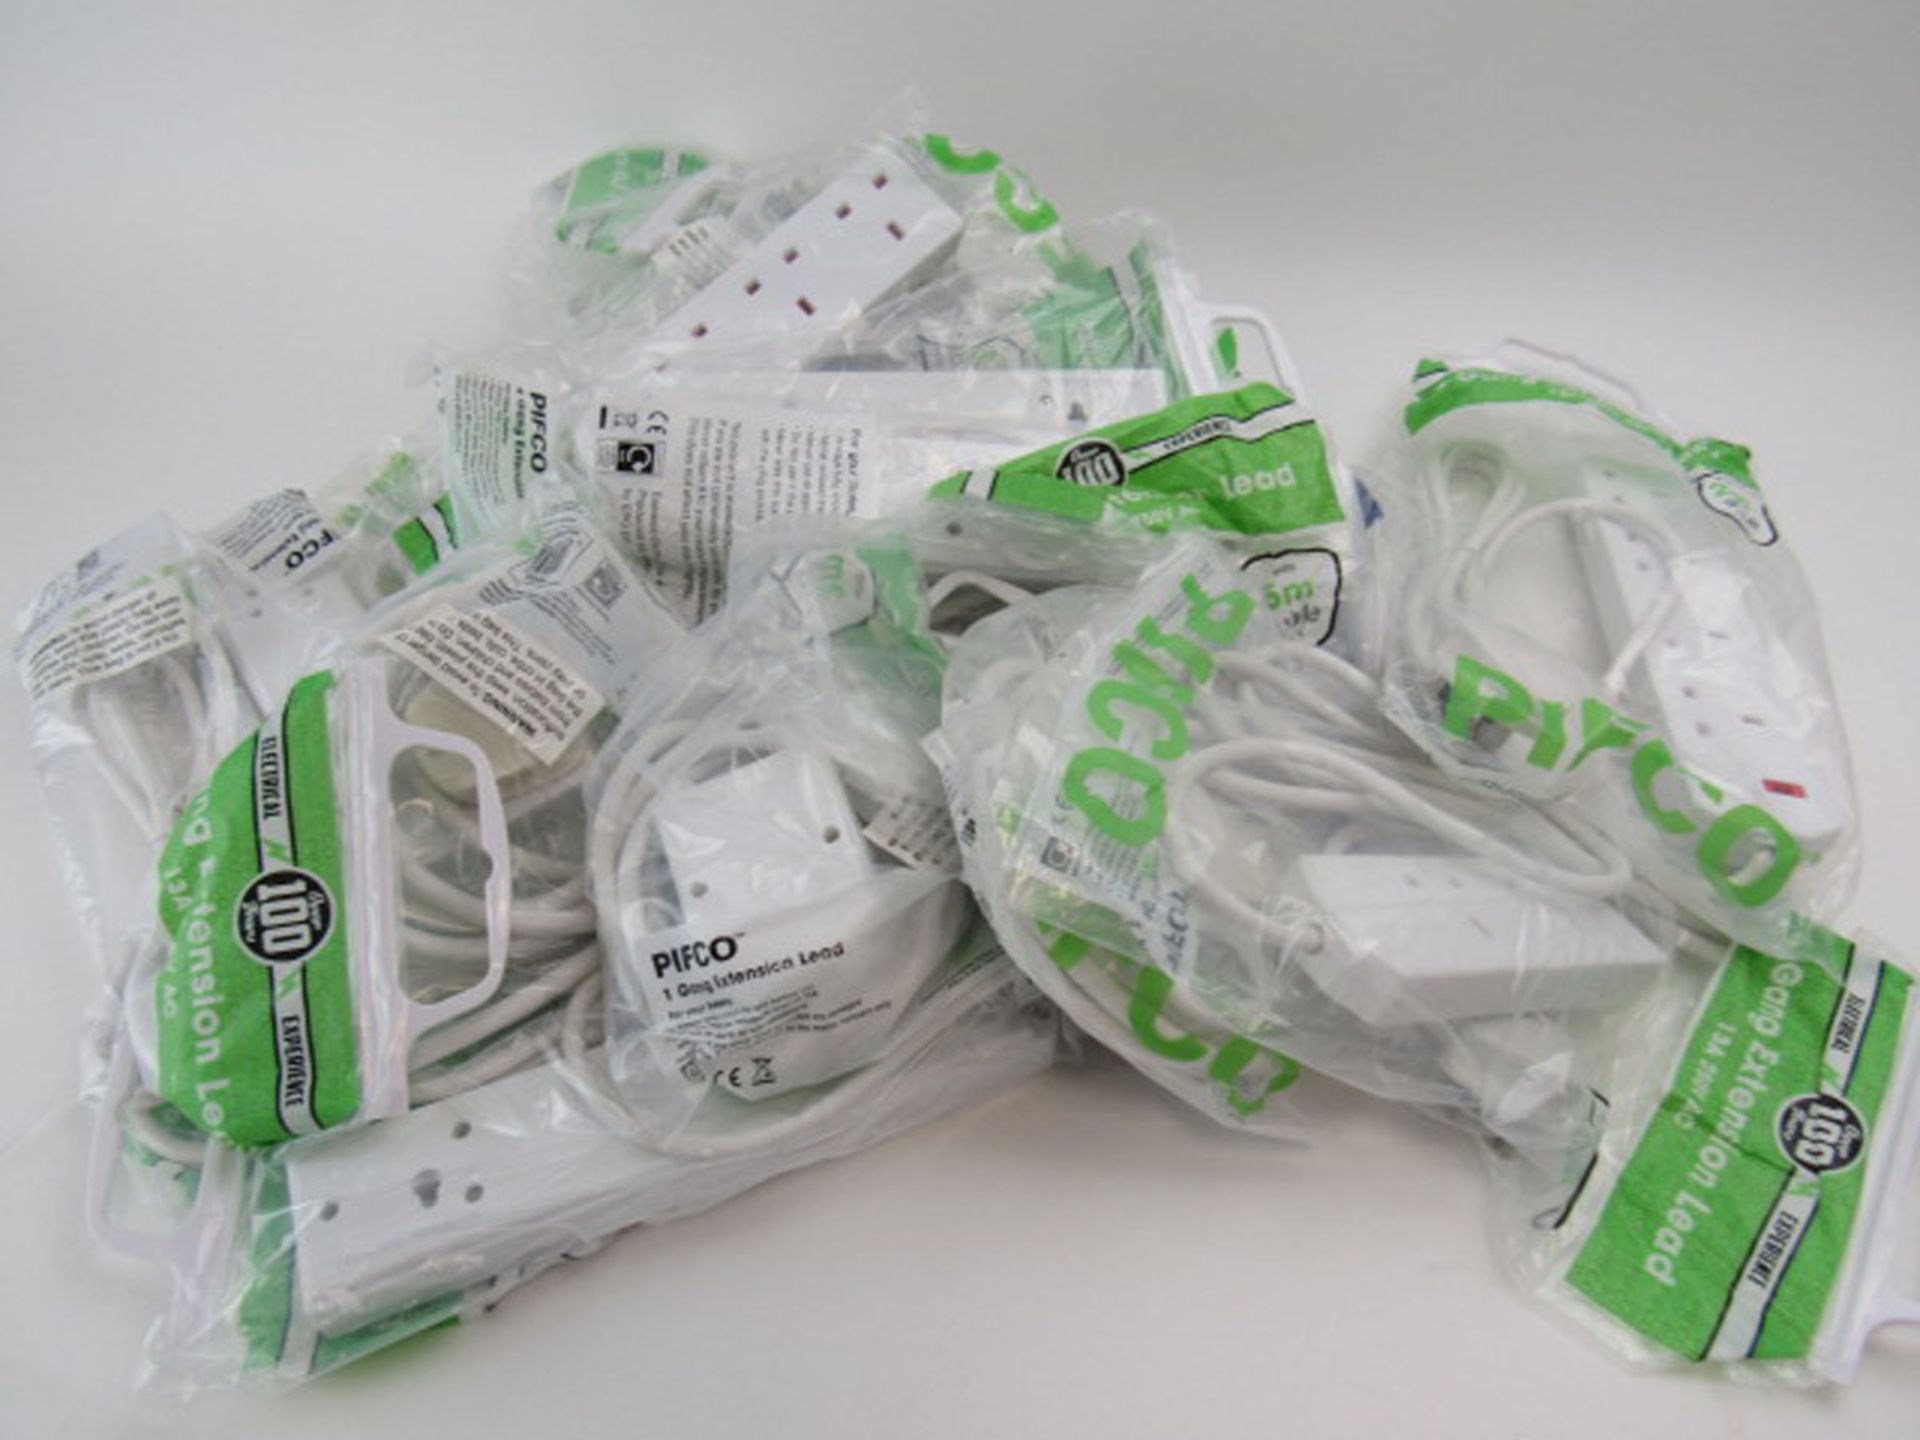 Bag containing 14 various extension leads